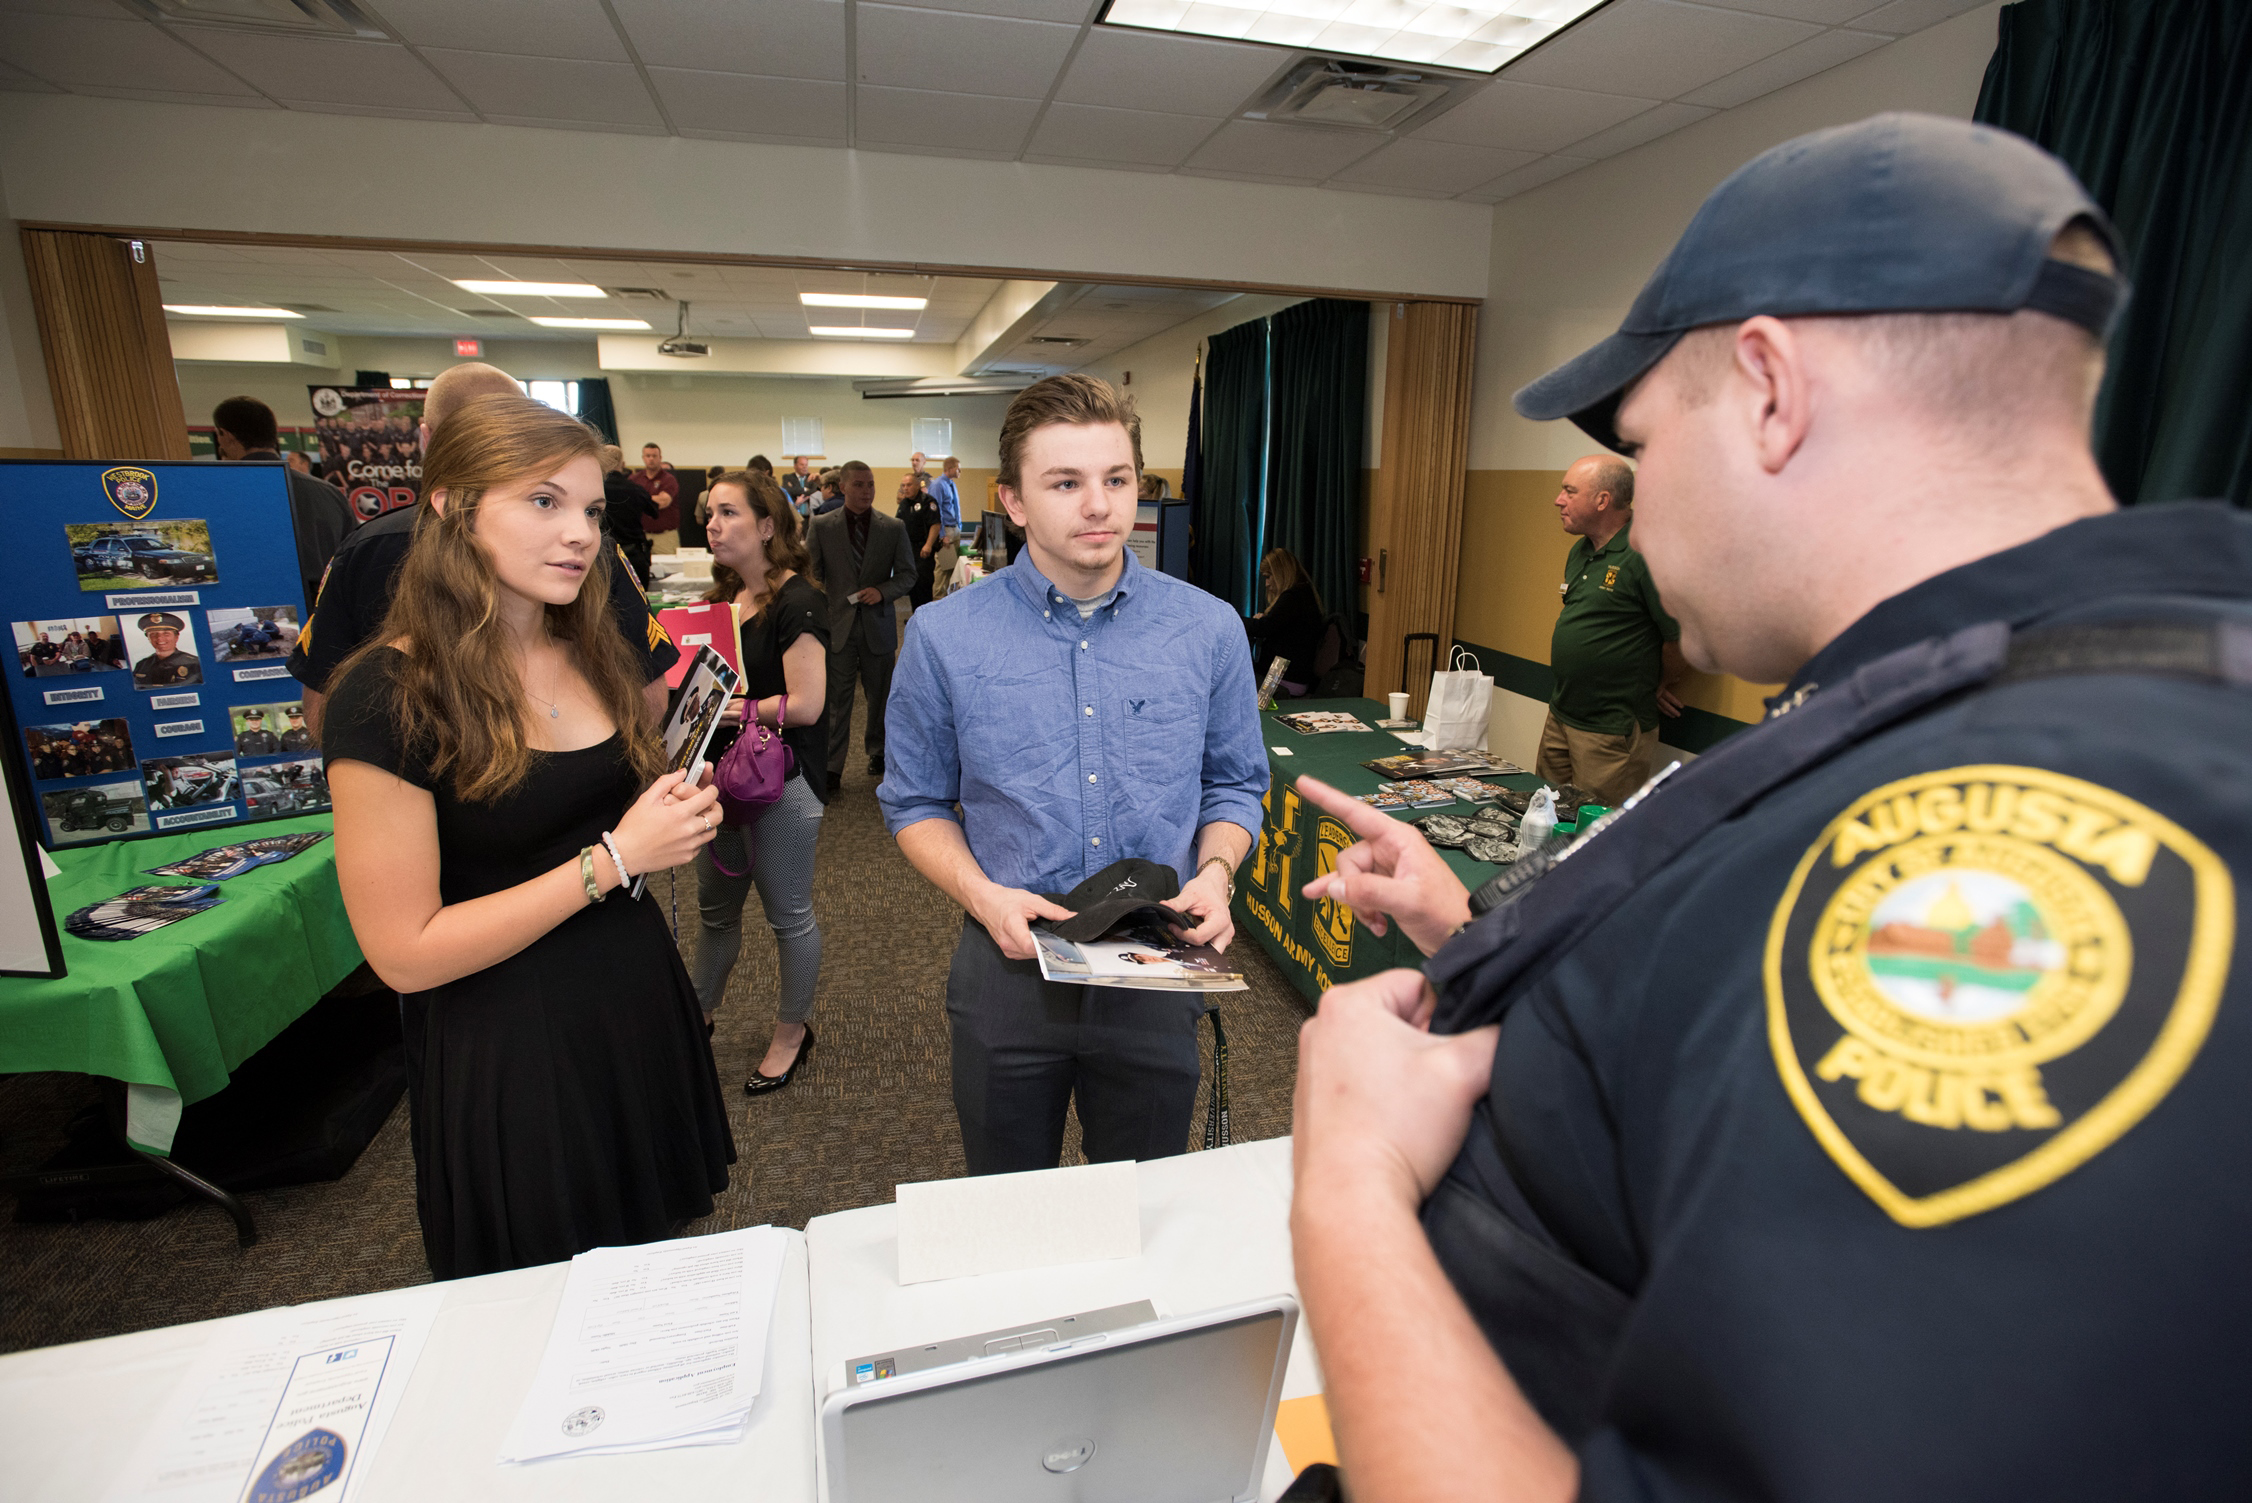 A female and male student speak with a potential employer.